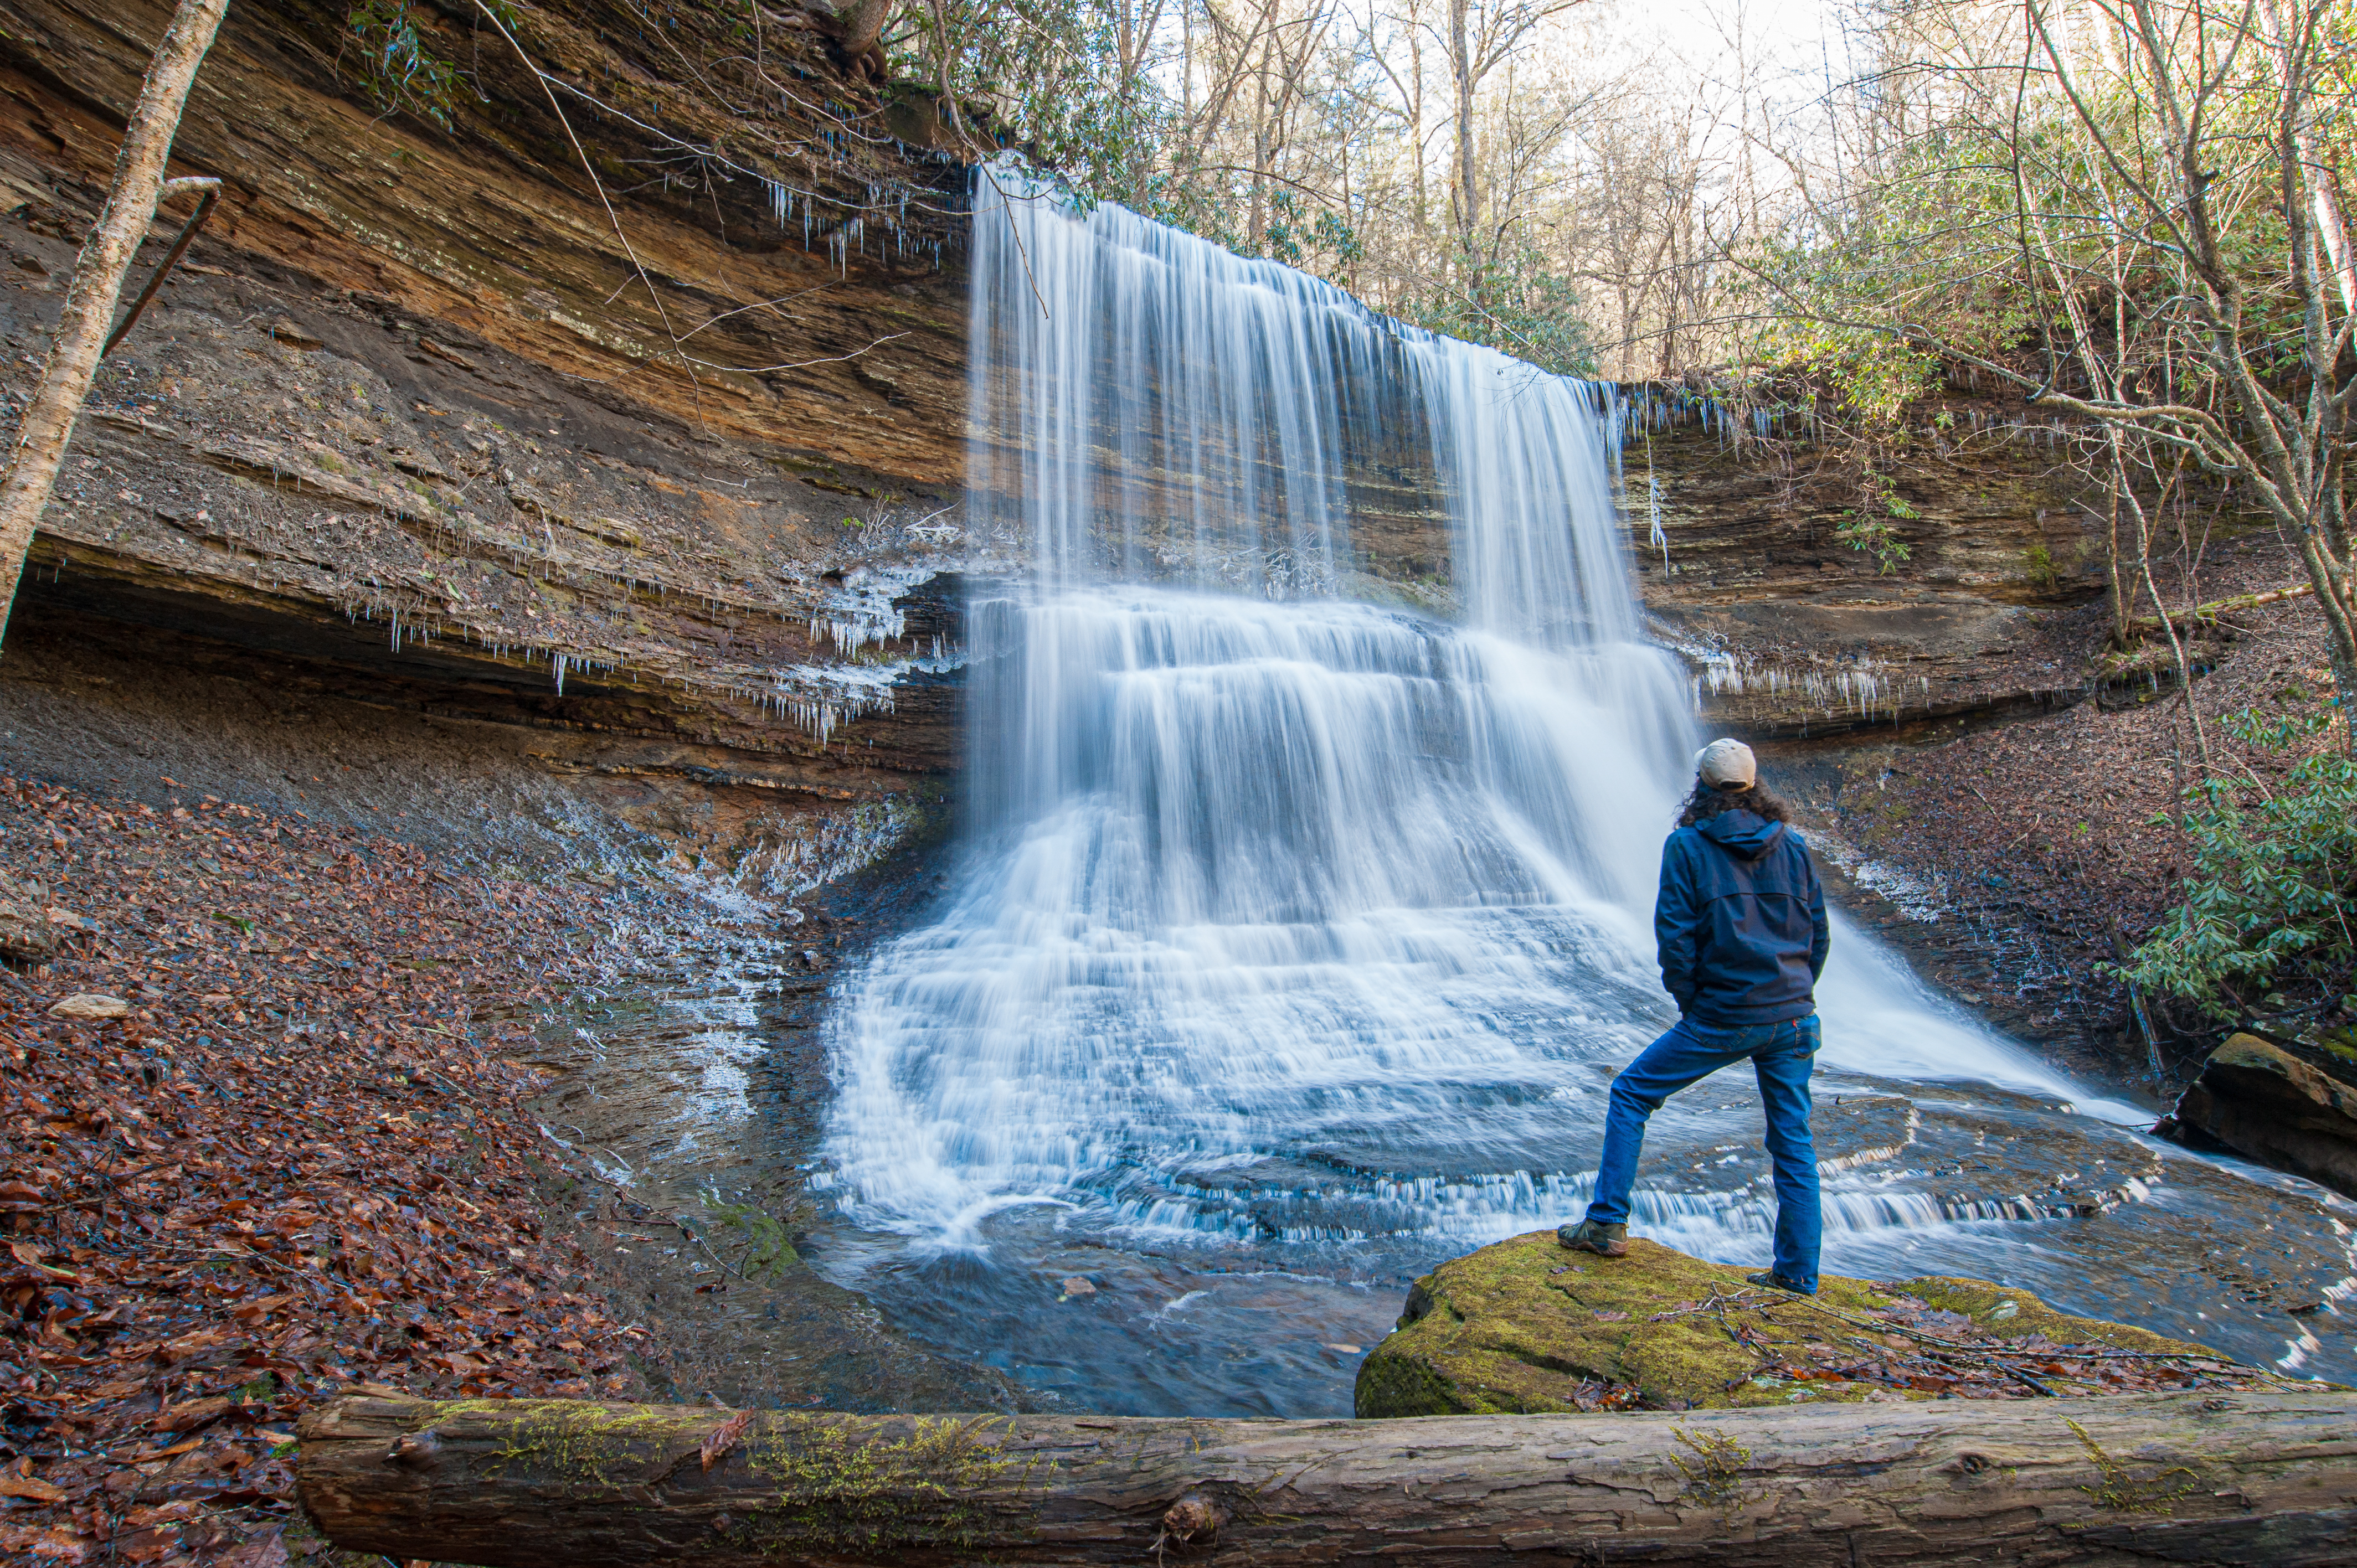 Eli Harris's Photo Contest Submission of a Waterfall